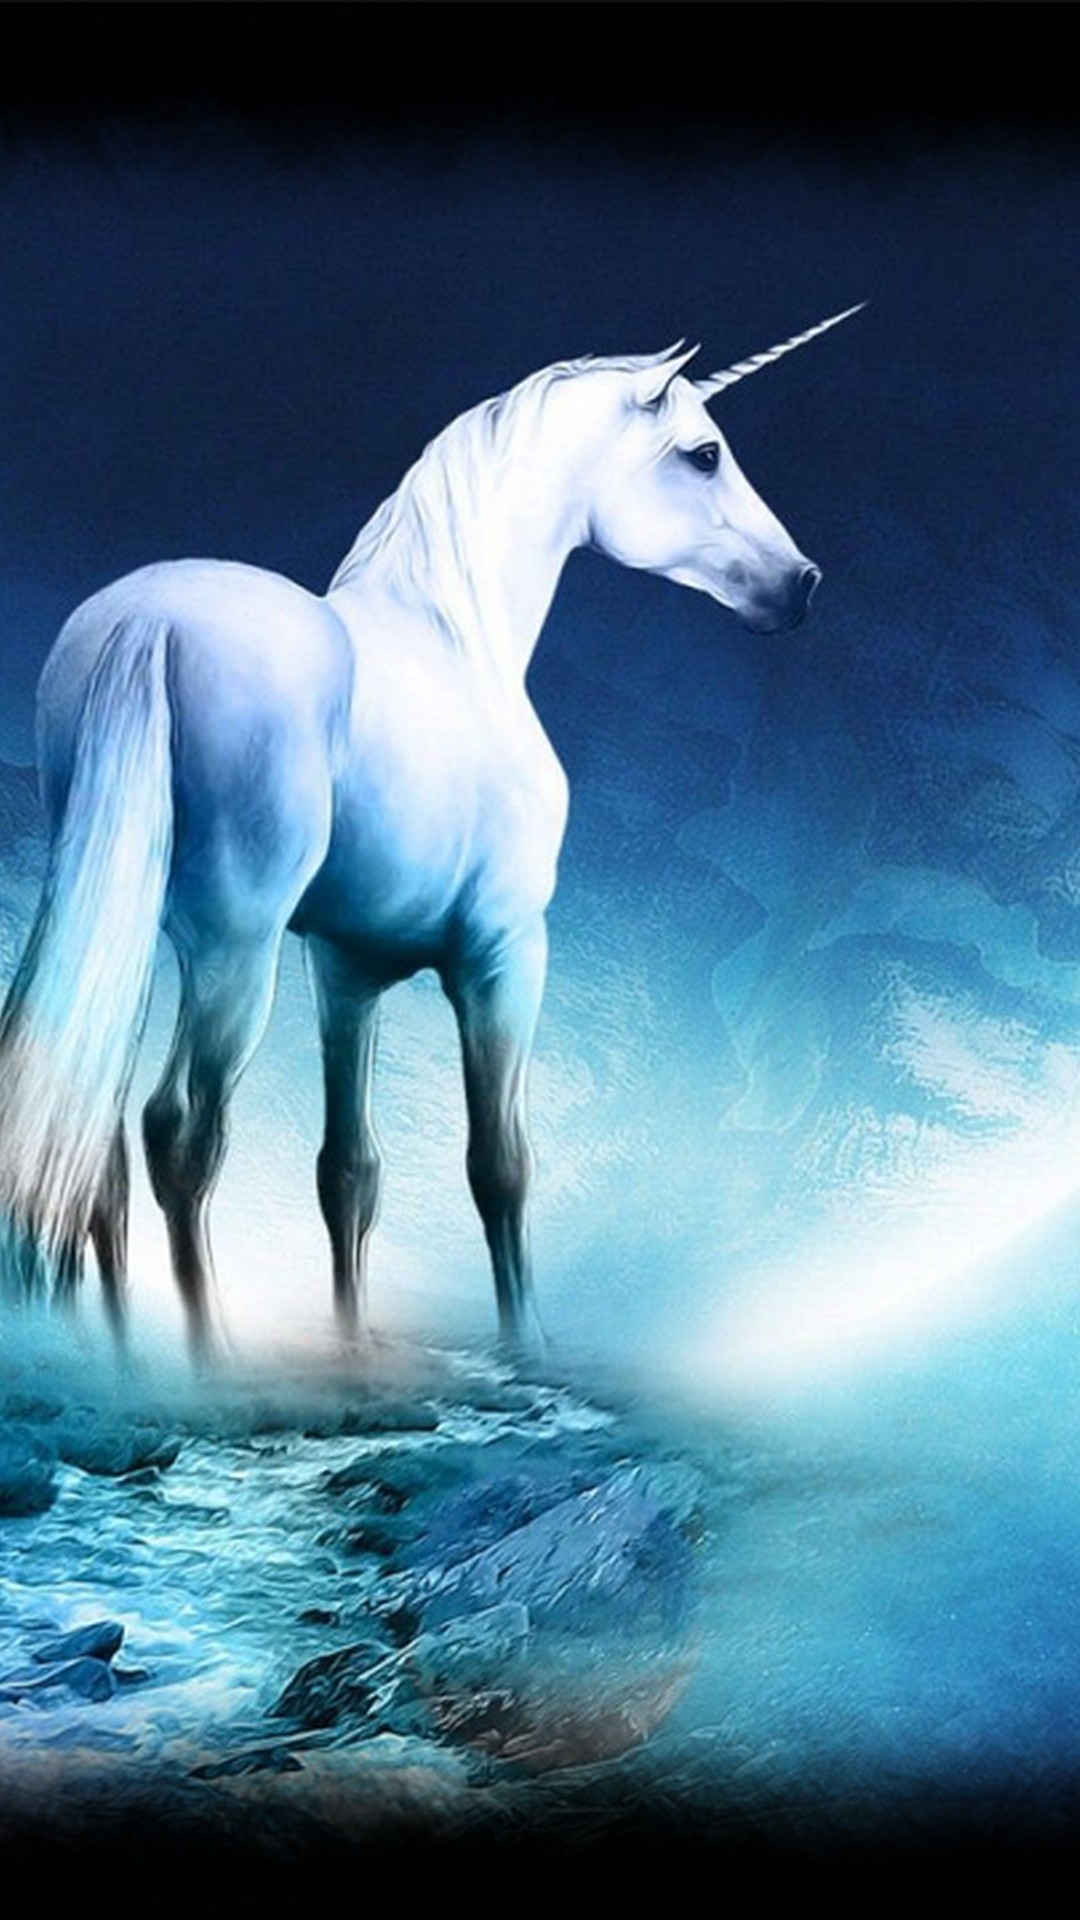 iPhone Wallpaper HD Unicorn With high-resolution 1080X1920 pixel. You can use this wallpaper for your iPhone 5, 6, 7, 8, X, XS, XR backgrounds, Mobile Screensaver, or iPad Lock Screen